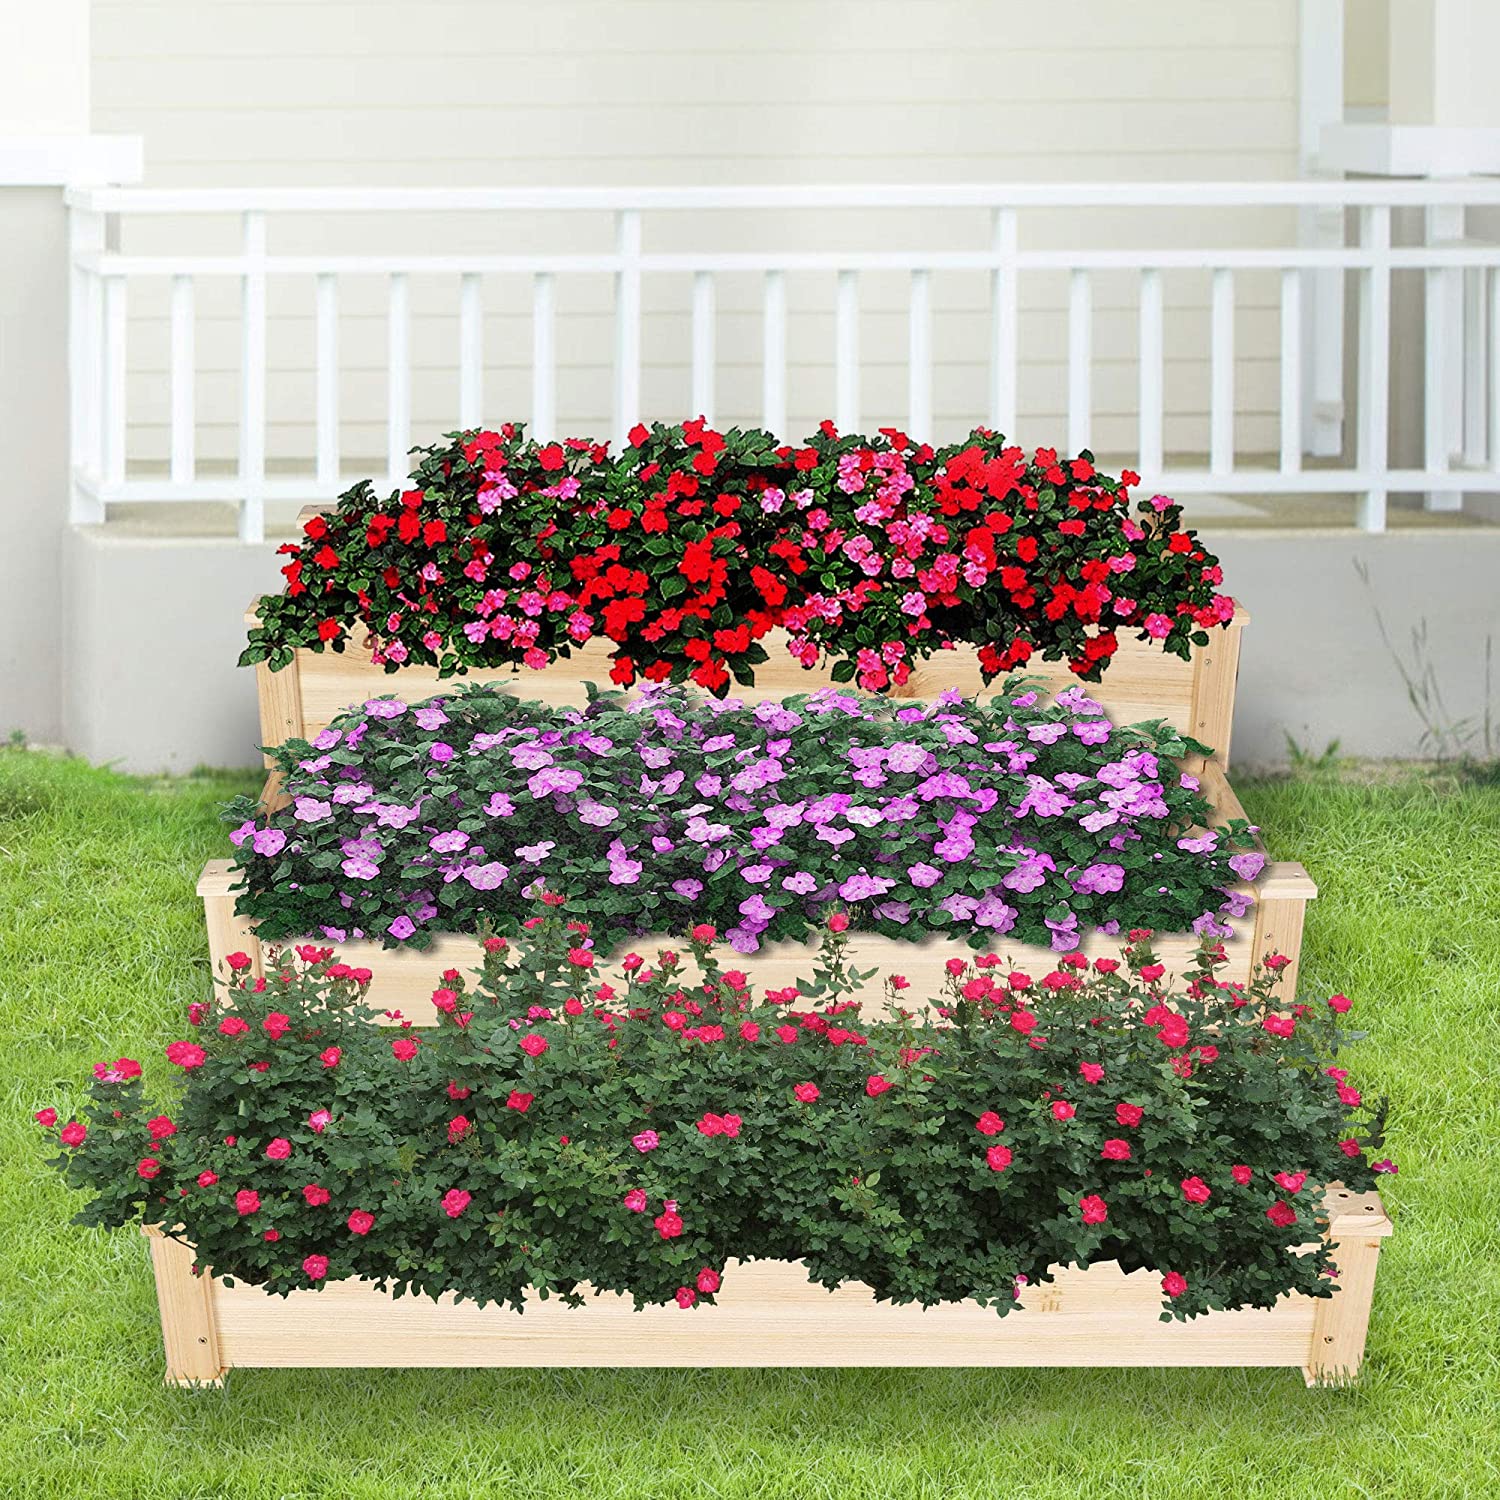 3 Tier Raised Garden Bed Outdoor Wooden Elevated Planter Box Solid Fir Wood for Planting Flower Vegetable Fruit